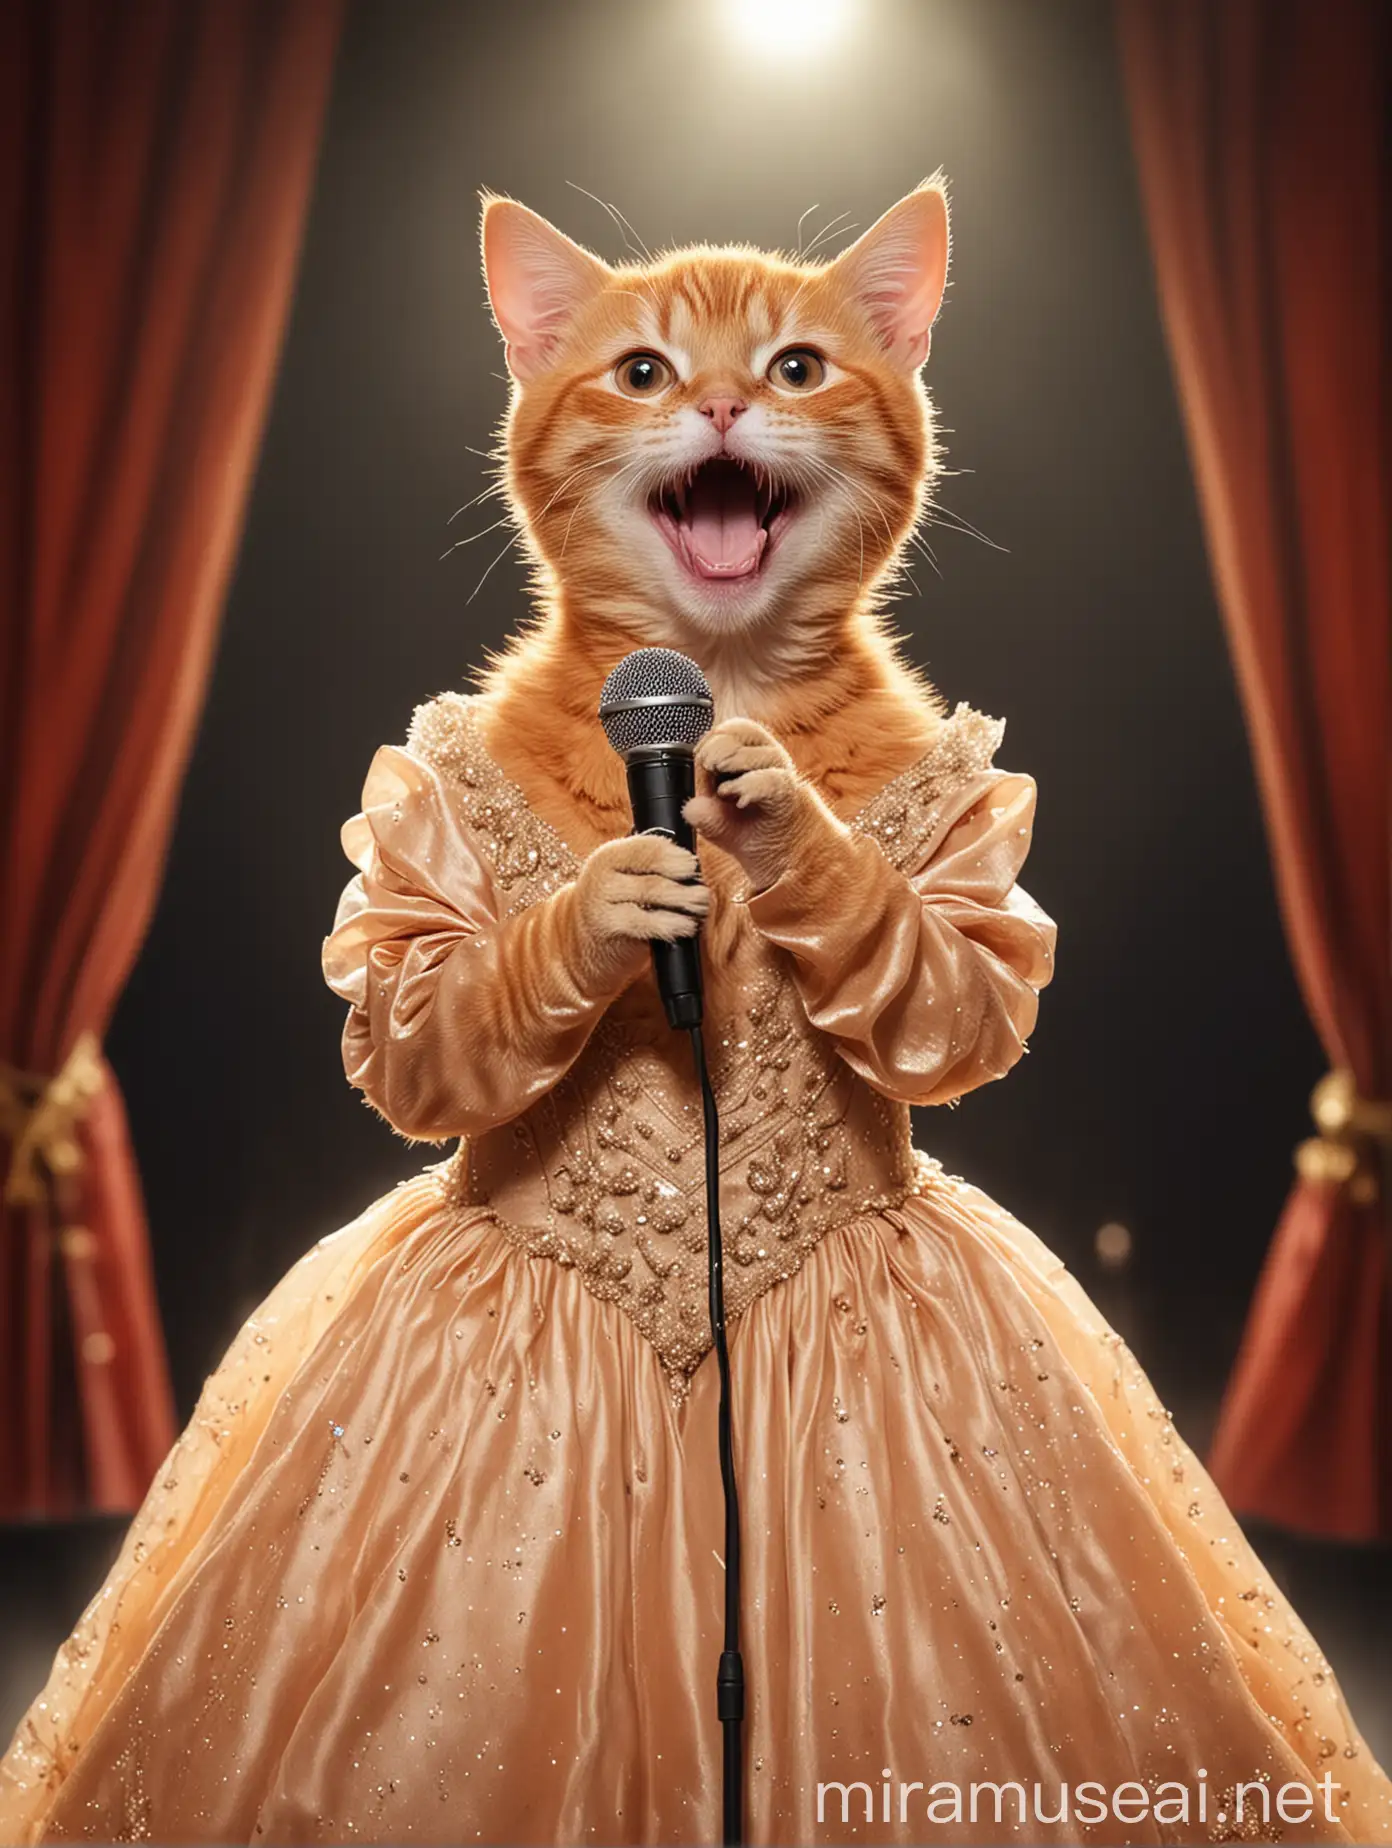 a little orange cat in a evening gown, holding a microphone and singing on stage